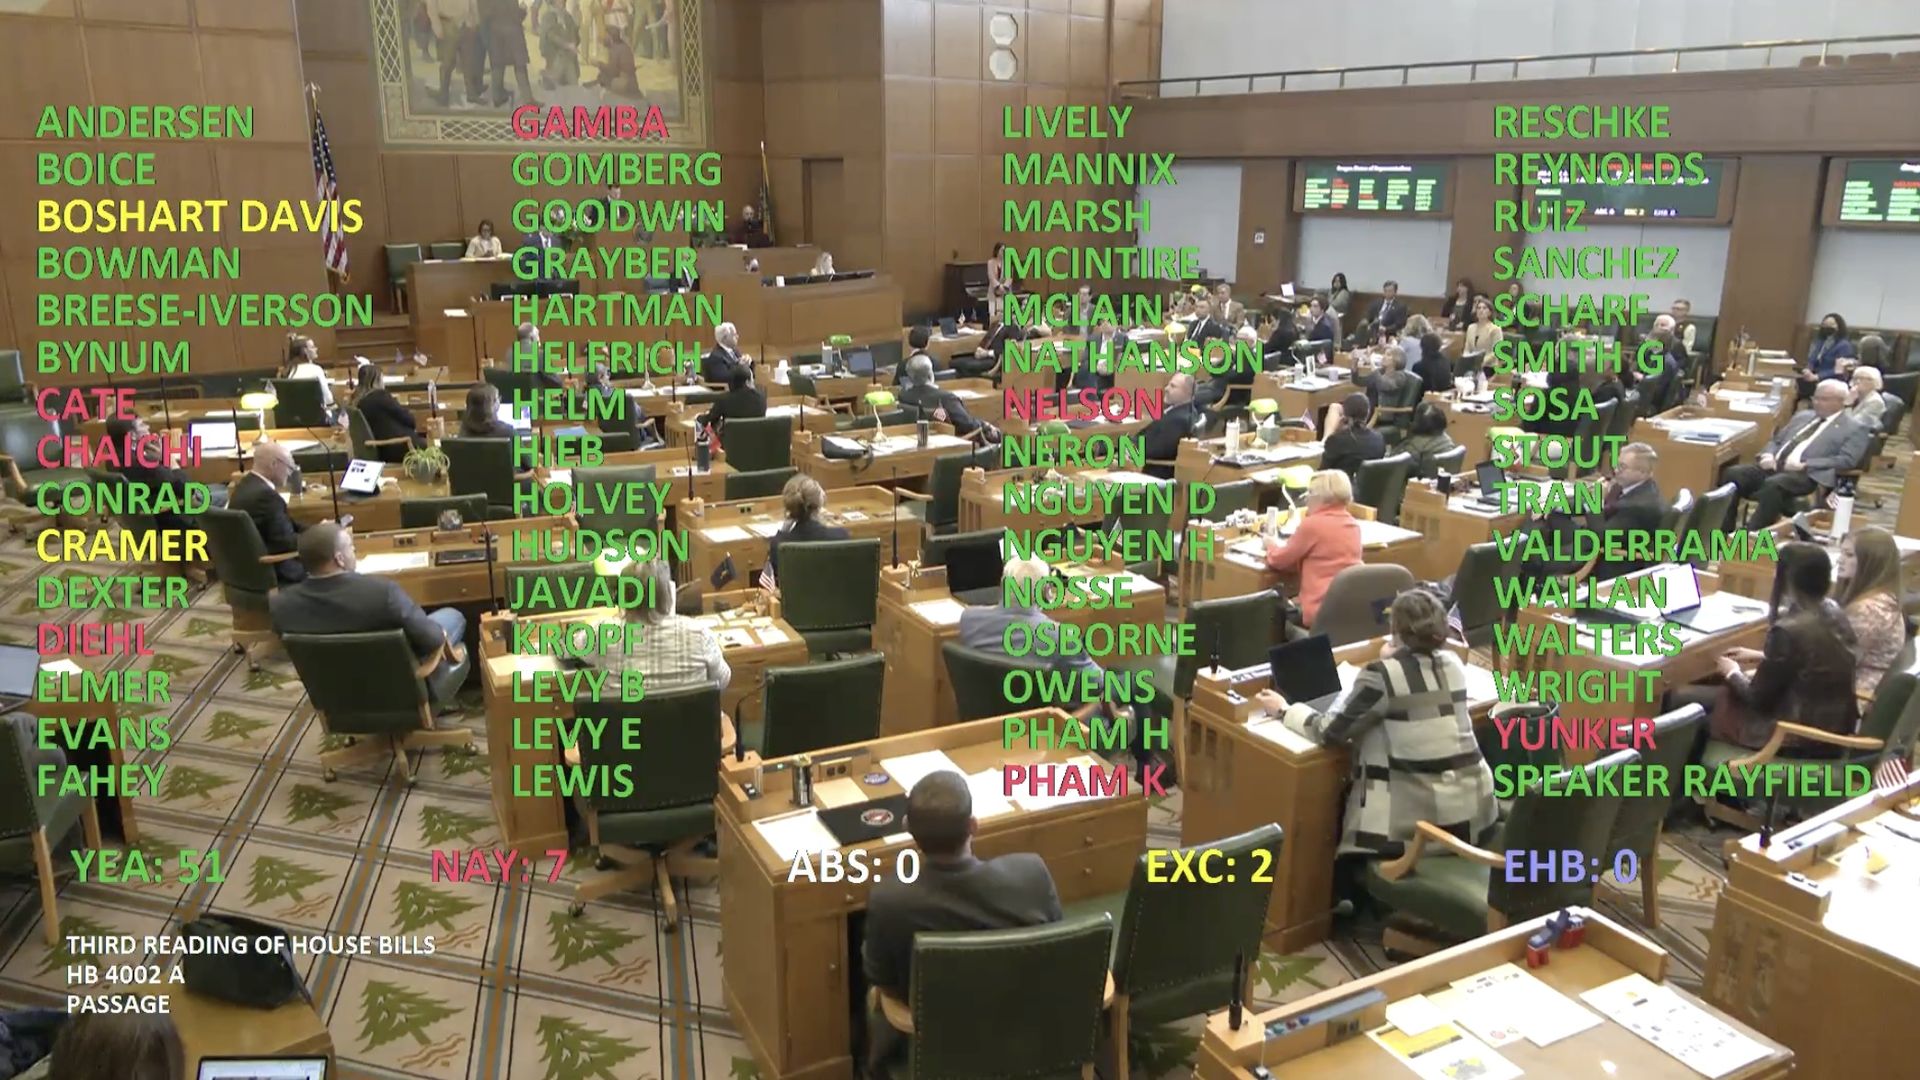 A screenshot of the vote count on Oregon House Bill 4002, showing 51 Yea votes and 7 Nays.